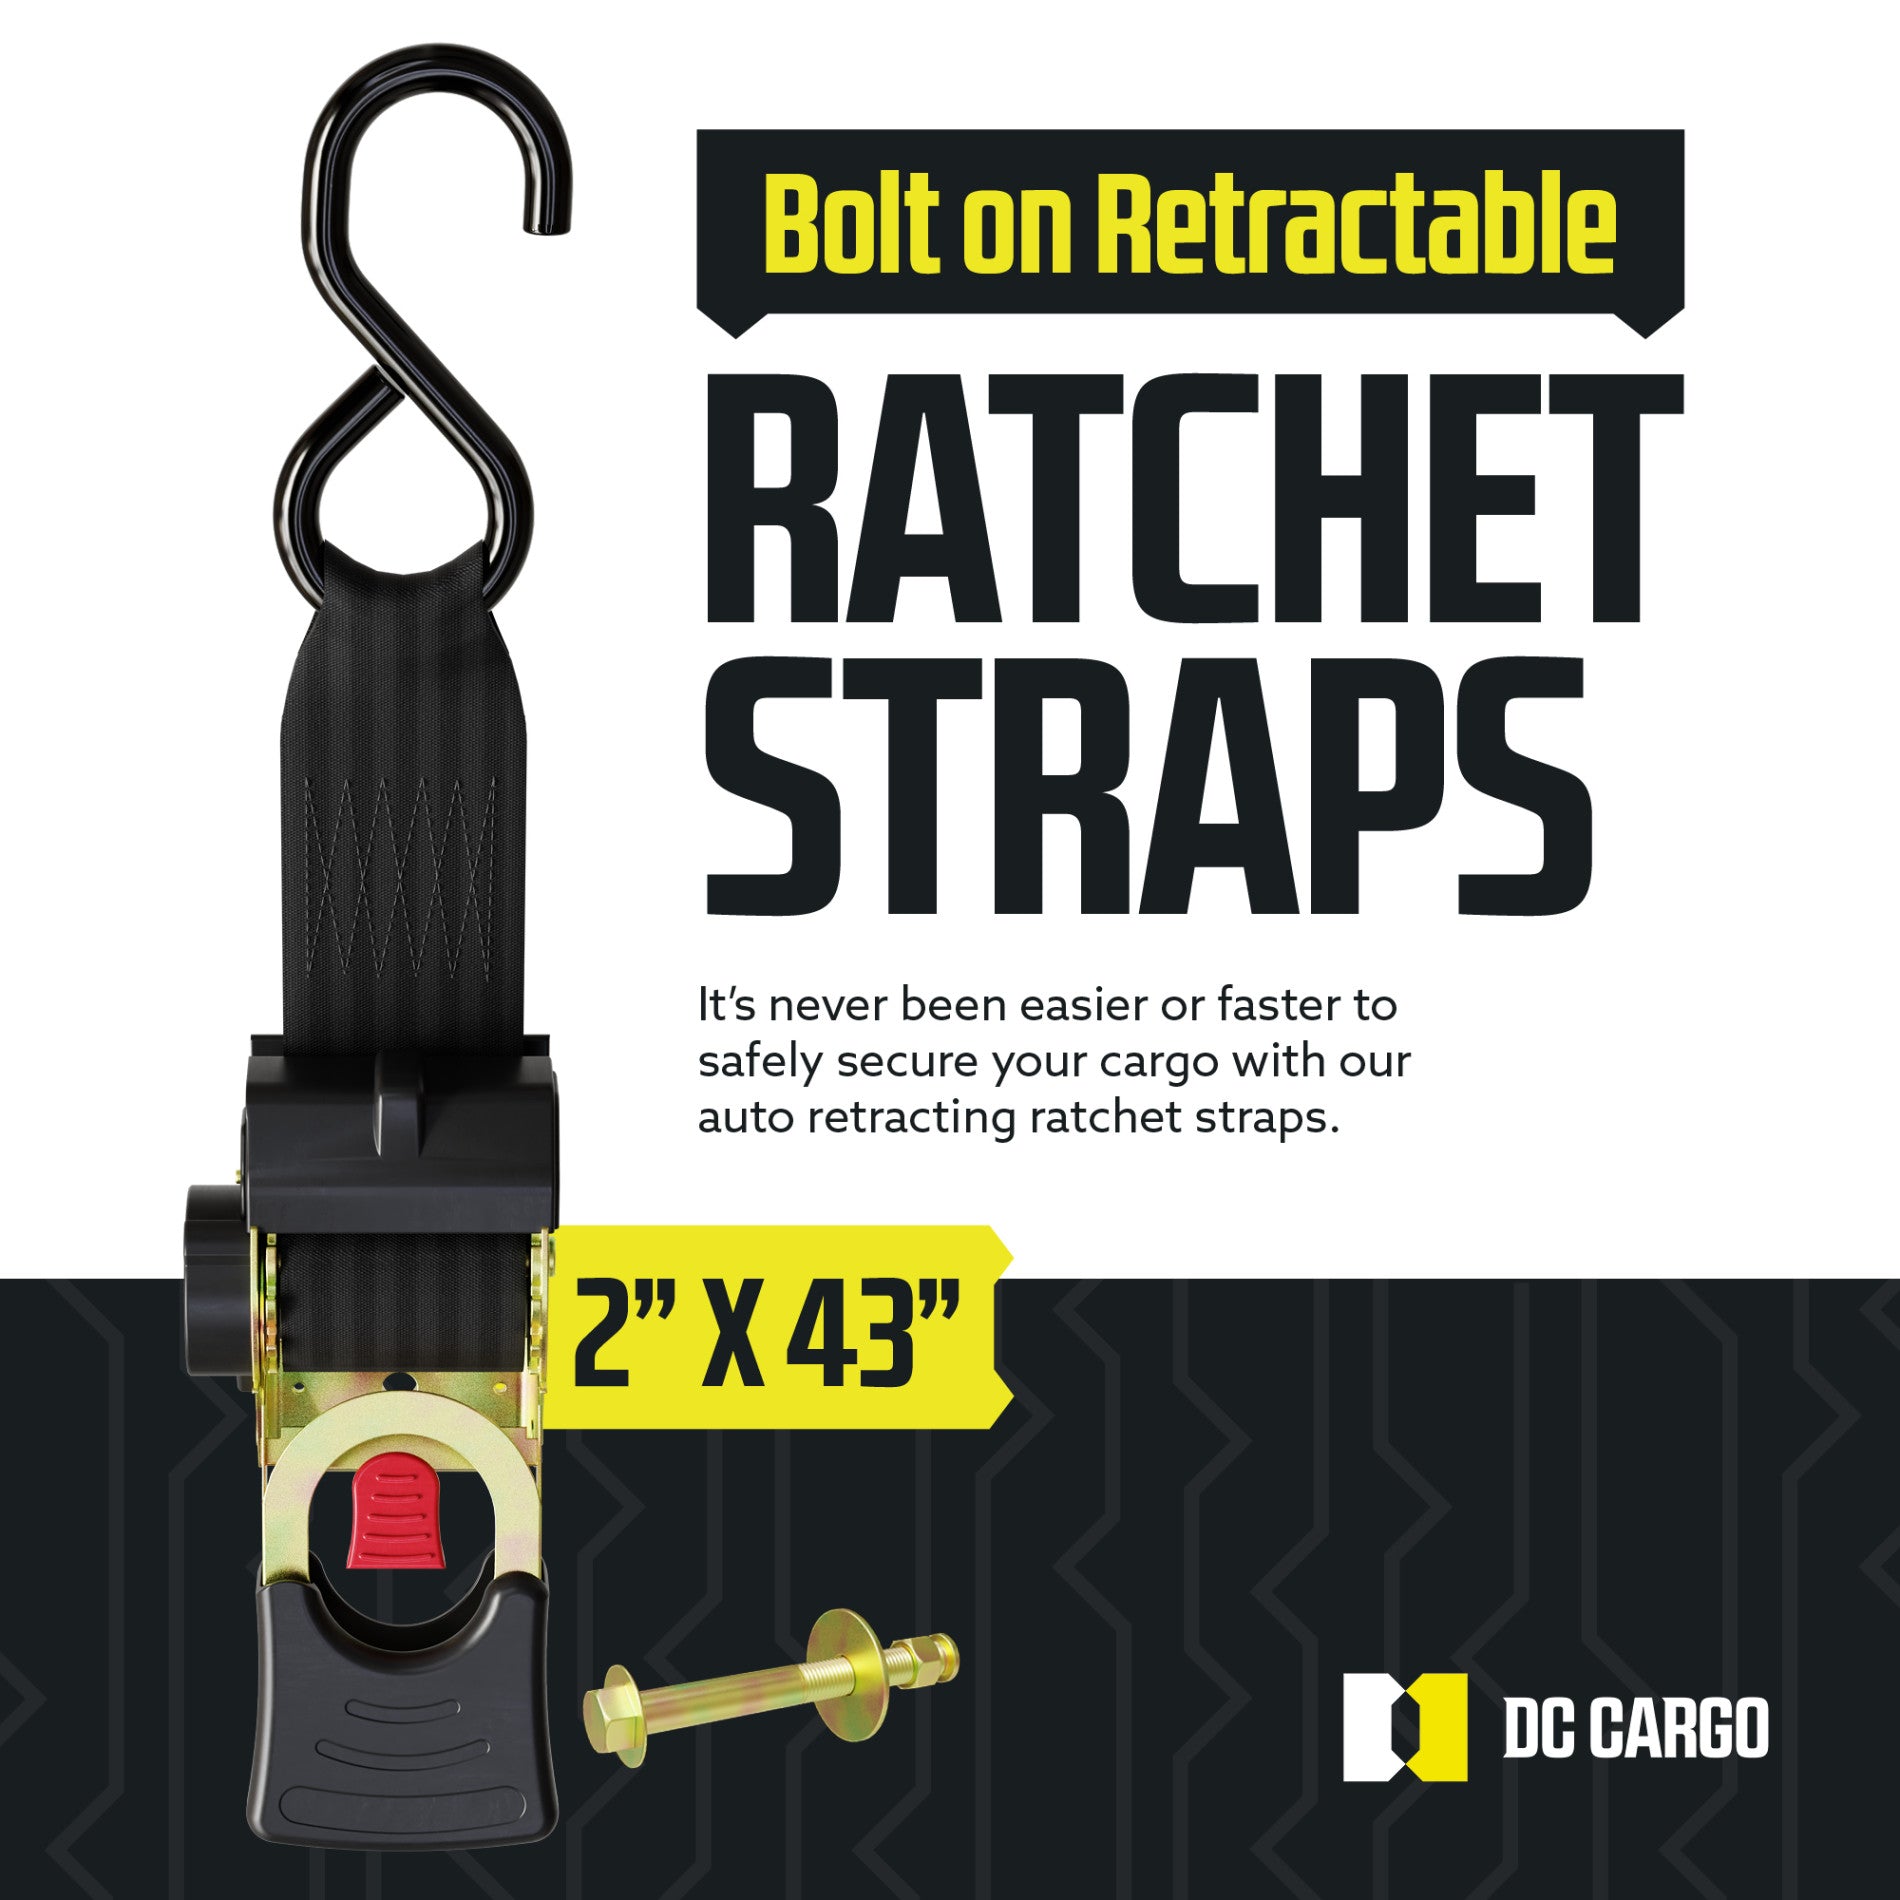 2 in x 43 in Bolt-On Retractable Ratchet Straps